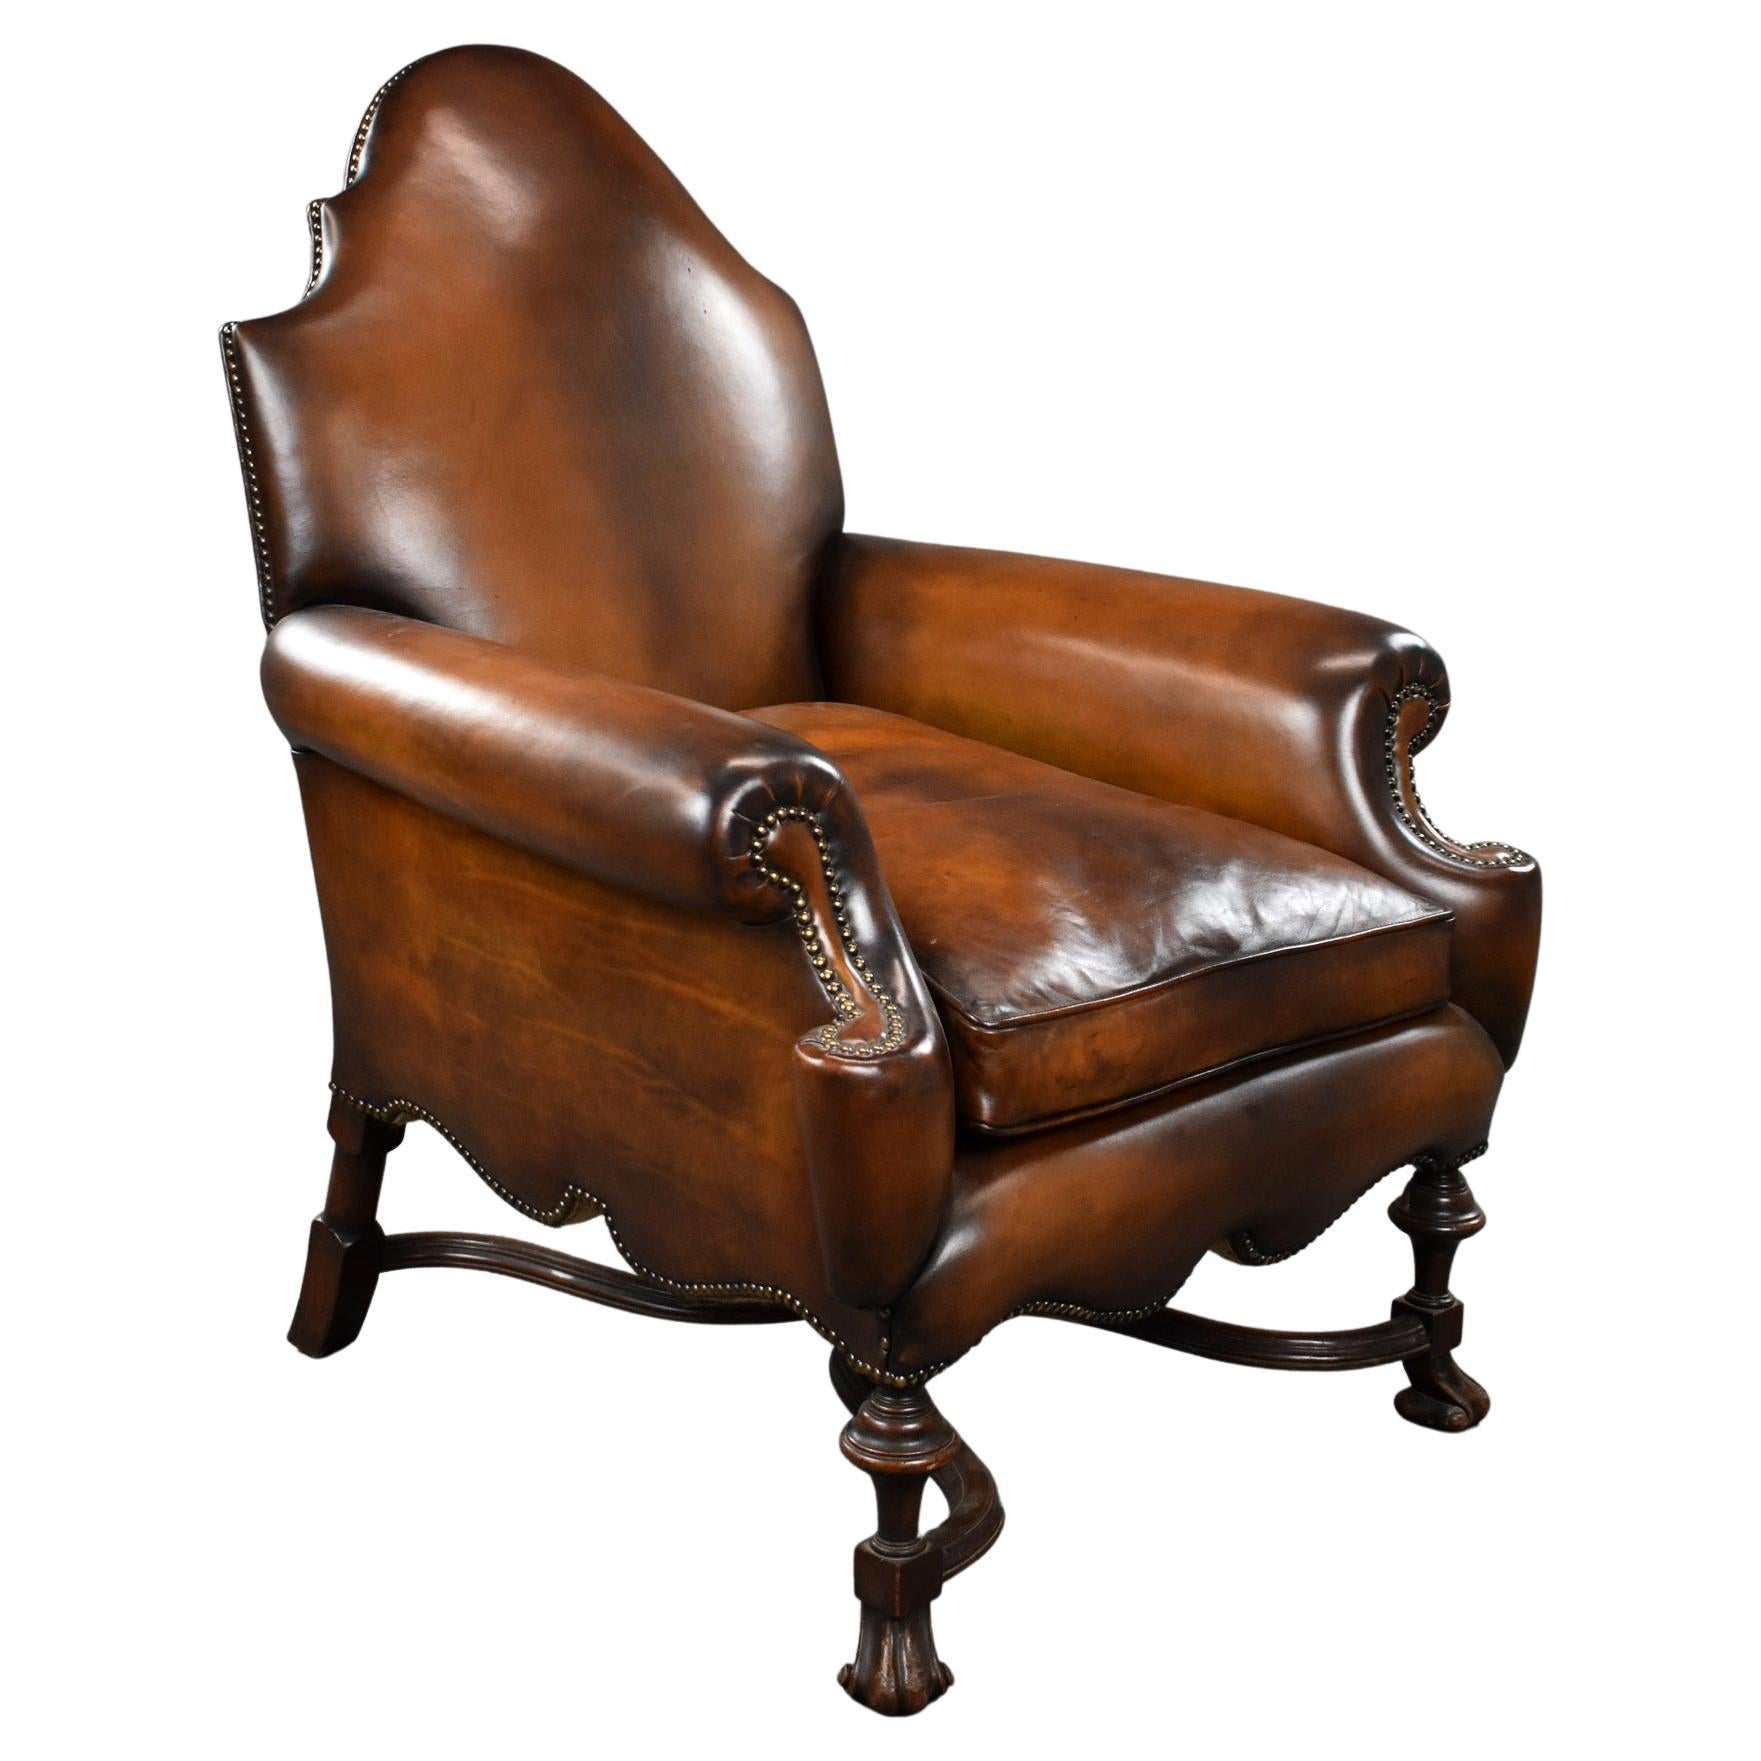 19th Century English Victorian Hand Dyed Leather Wing Back Armchair